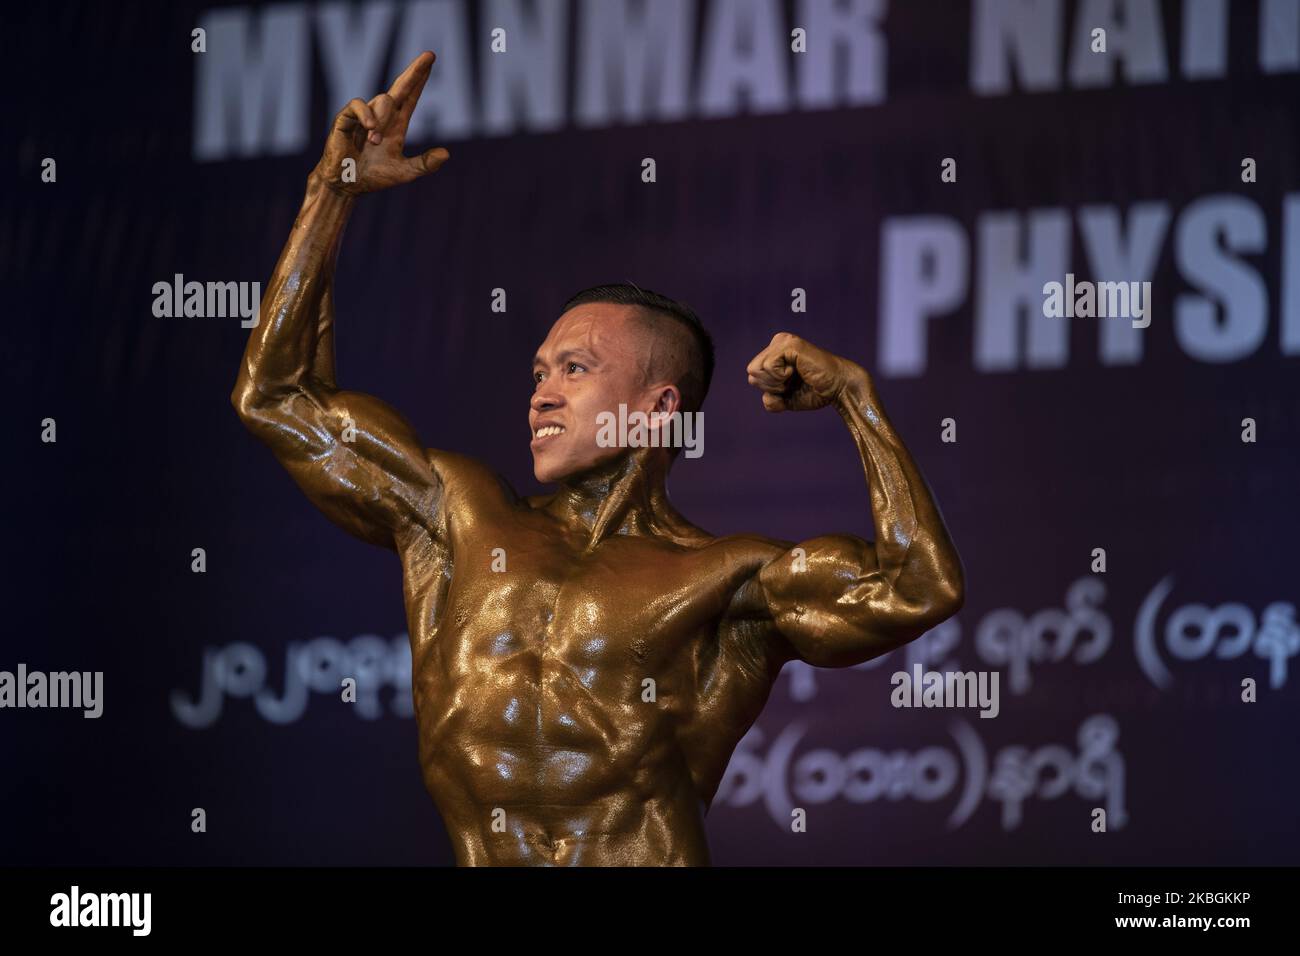 Male bodybuilding athlete competes in the Myanmar National Championship Bodybuilding and Physique Sports Competition in Yangon on February 9, 2020. (Photo by Shwe Paw Mya Tin/NurPhoto) Stock Photo